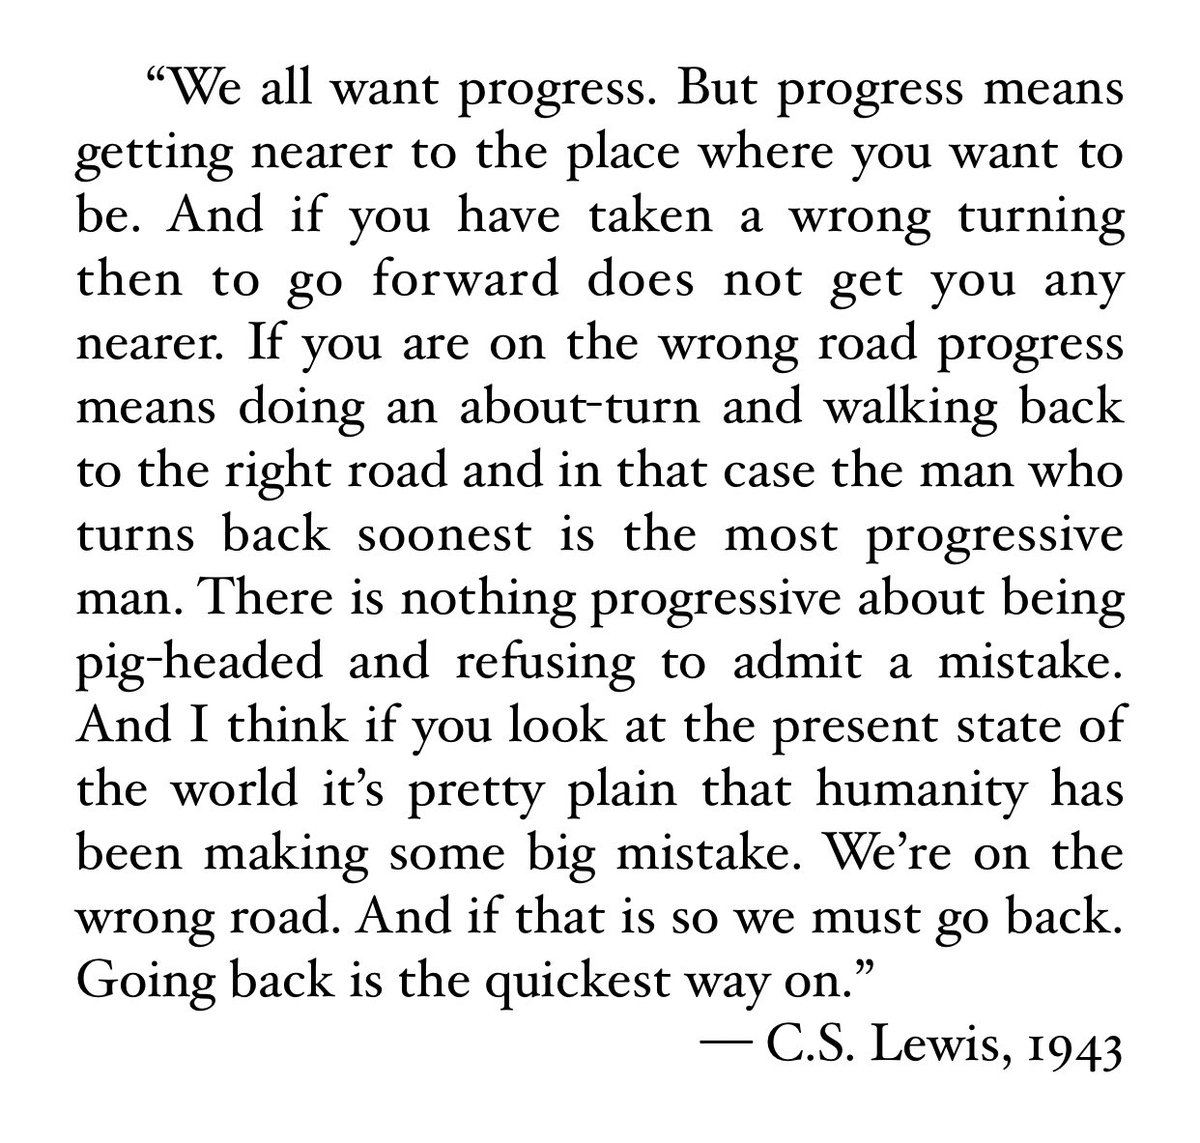 “We all want progress. But progress means getting nearer to the place where you want to be. And if you have taken a wrong turning then to go forward does not get you any nearer...Going back is the quickest way on.” — C.S. Lewis, 1943